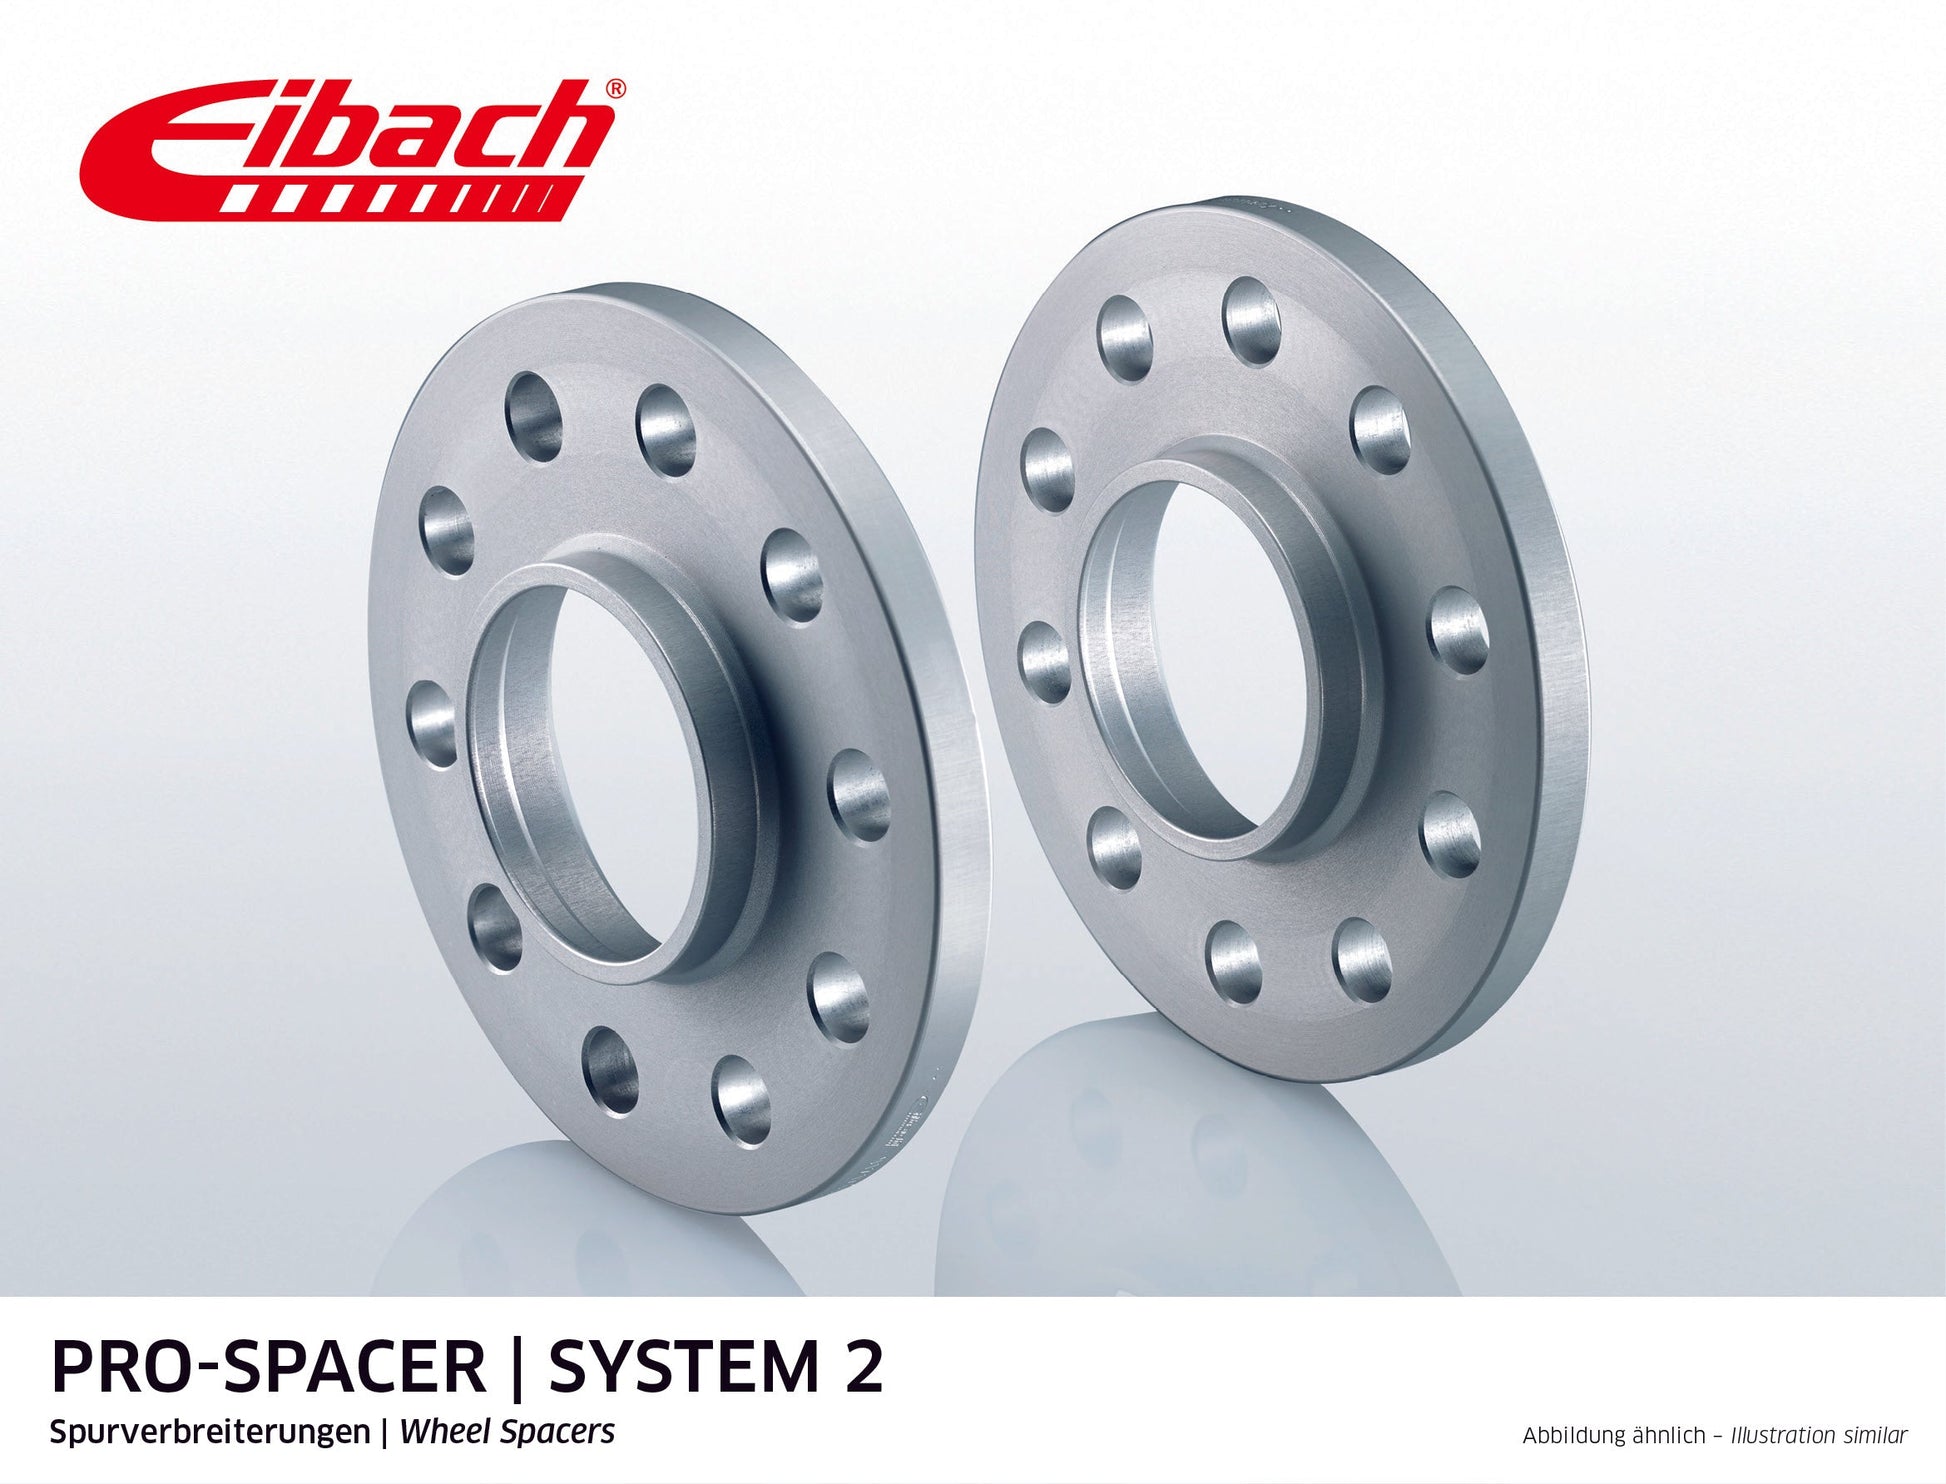 Eibach Pro-Spacer Kit (Pair Of Spacers) 10mm Per Spacer (System 2) S90-2-10-039 (Silver) at £101.18